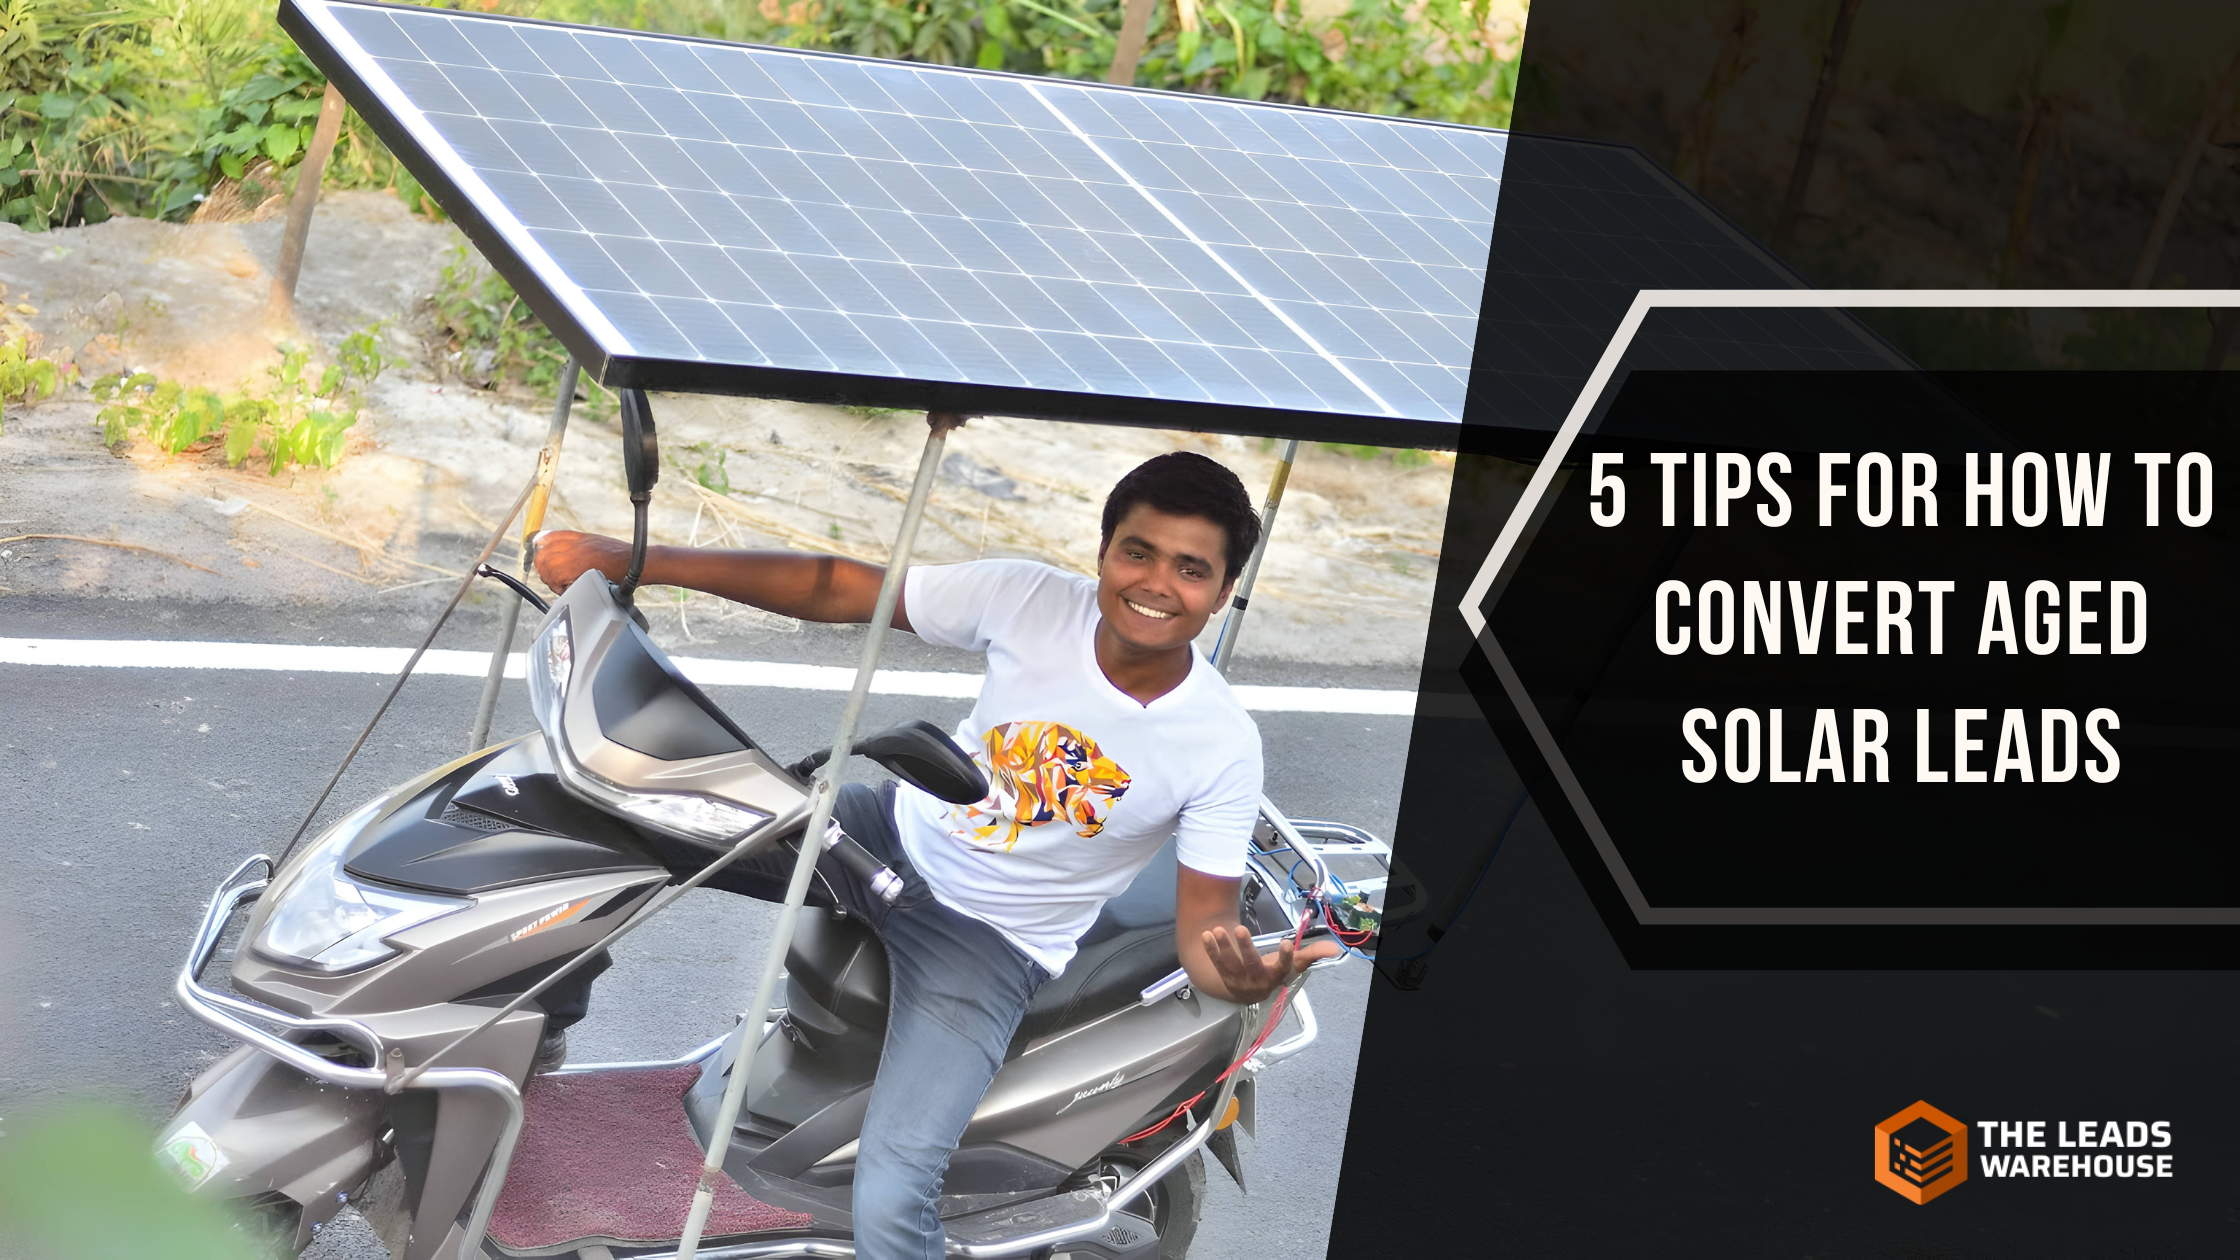 Convert Aged Solar Leads | 5 Tips